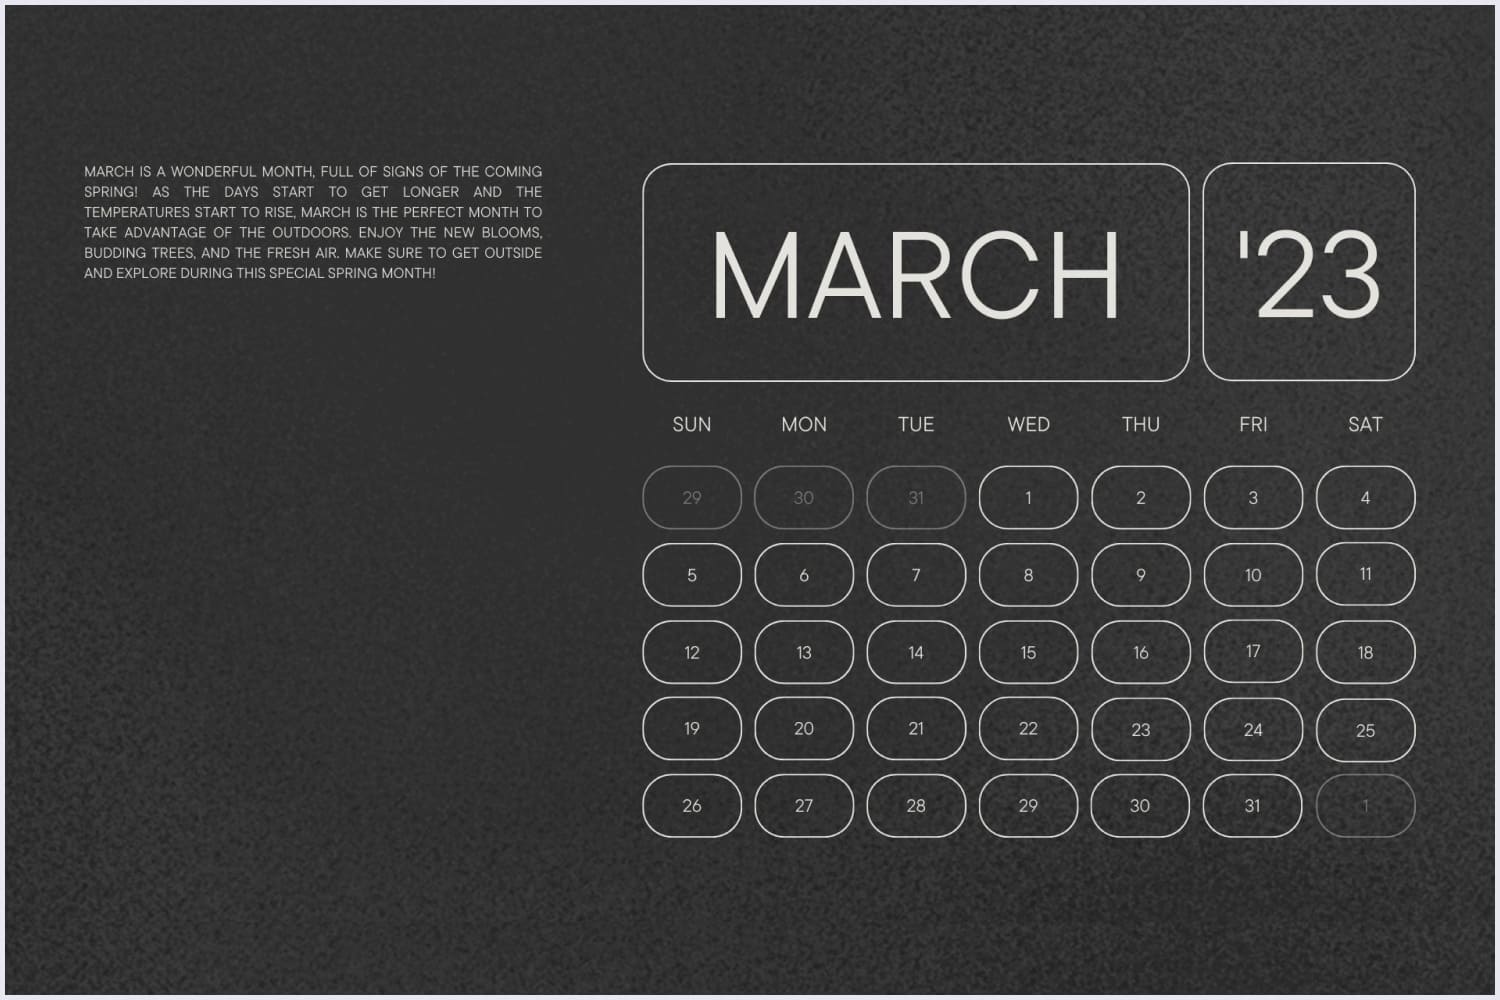 Calendar for March in the form of a calculator with a black background.